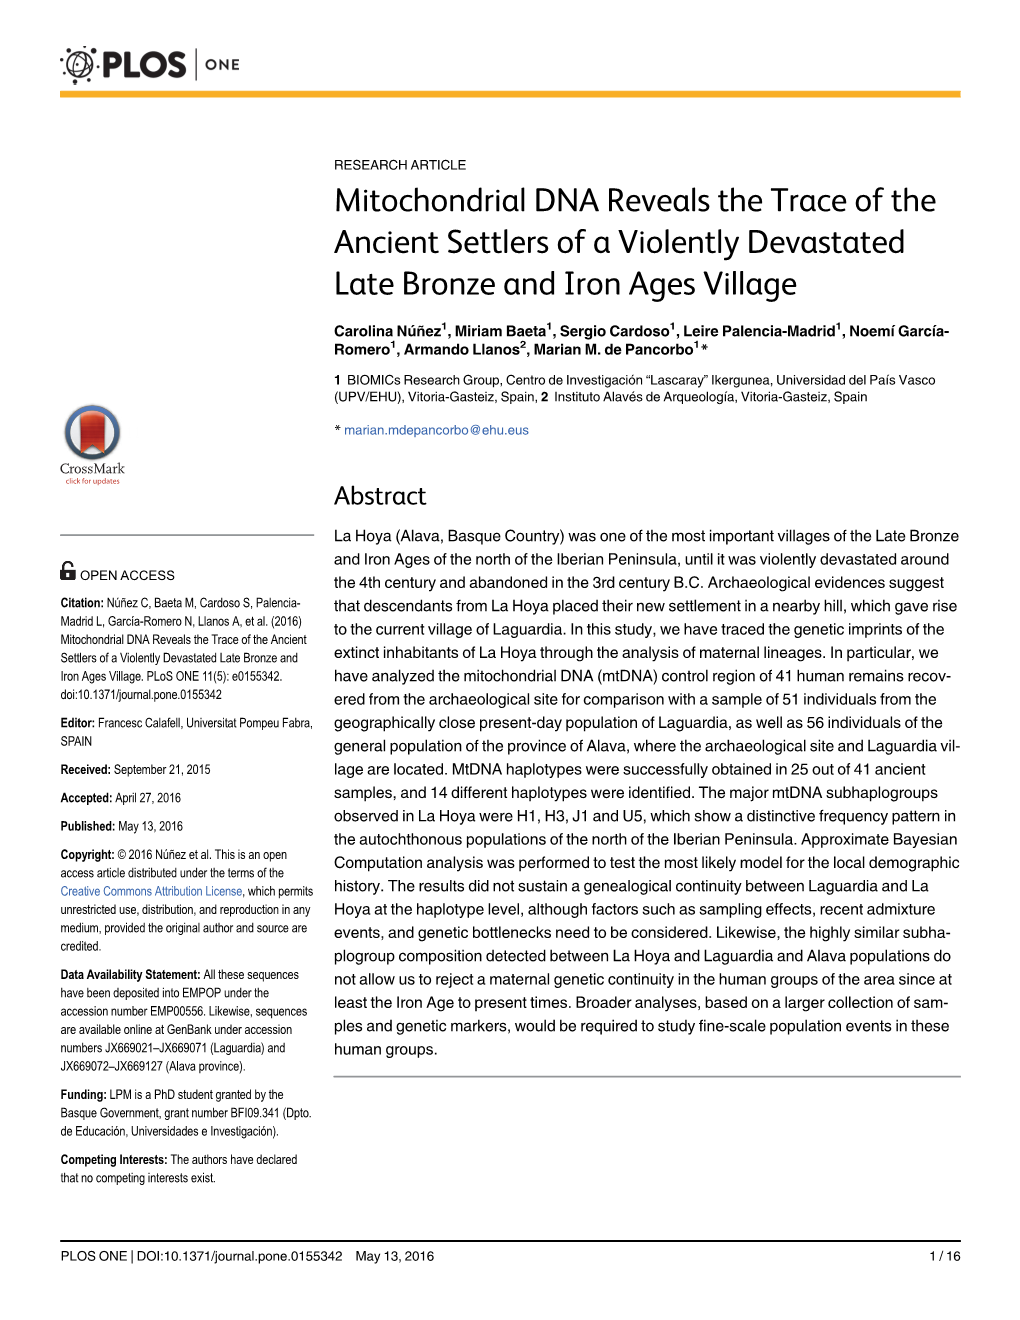 Mitochondrial DNA Reveals the Trace of the Ancient Settlers of a Violently Devastated Late Bronze and Iron Ages Village